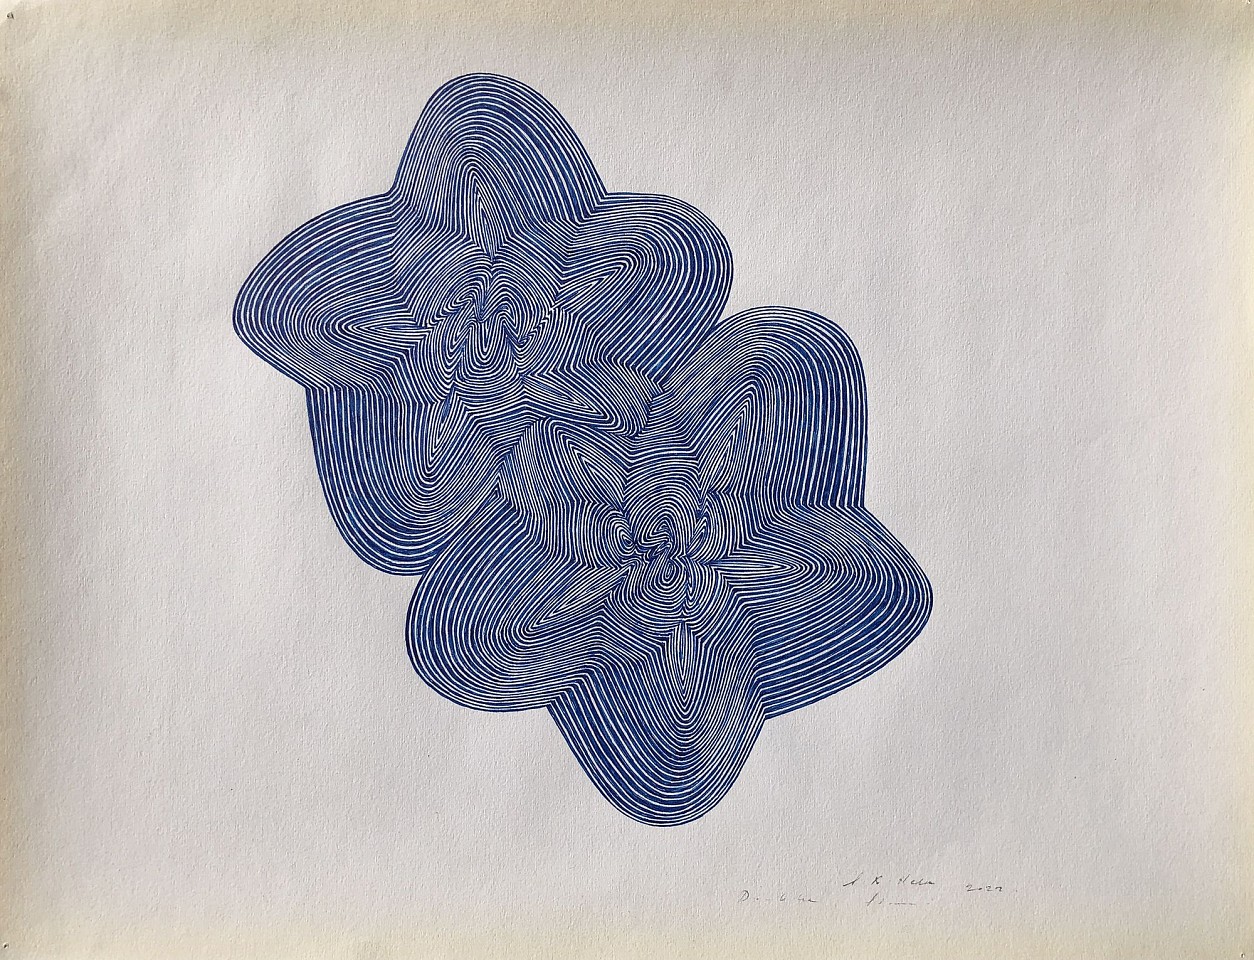 Stewart Helm, Double Flower, 2022
ink on paper, 13"x 17"
SH-634
Price Upon Request